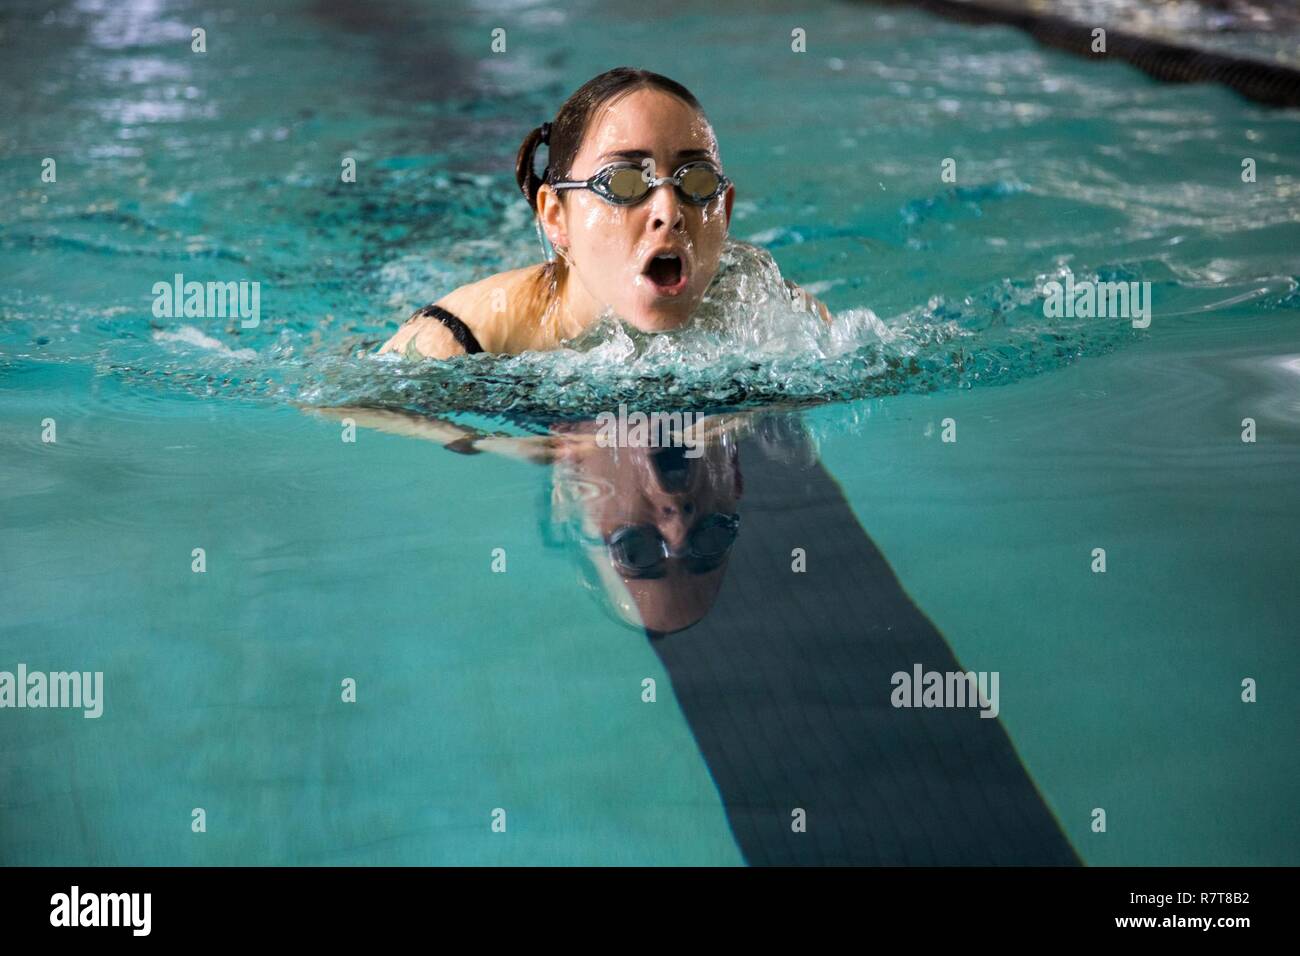 U.S. Army Sgt. Karla Caldera, Ft. Belvoir, Va., competes in the swimming event for the Warrior Care and Transition's Army Trials at Fort Bliss, Texas, April 6, 2017. About 80 wounded, ill and injured active-duty Soldiers and veterans are competing in eight different sports 2-6 April for the opportunity to represent Team Army at the 2017 Department of Defense Warrior Games. Stock Photo